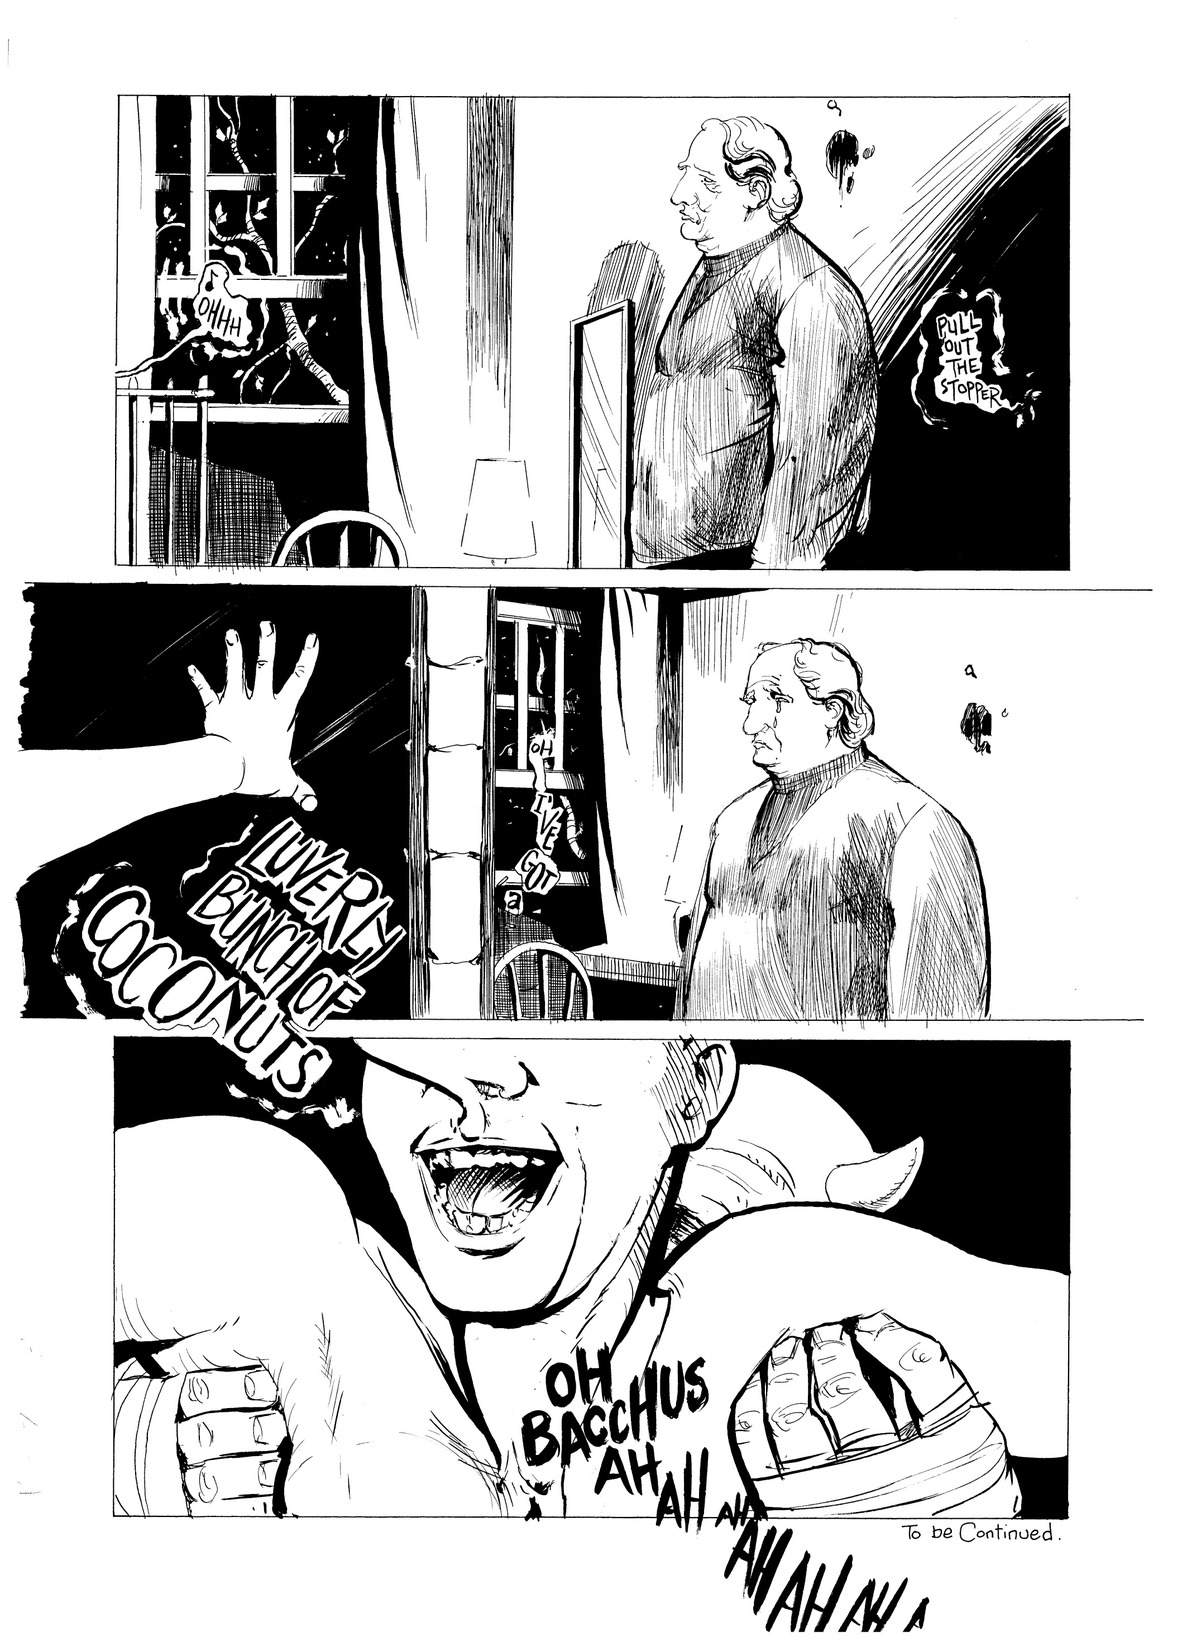 Read online Eddie Campbell's Bacchus comic -  Issue # TPB 5 - 86